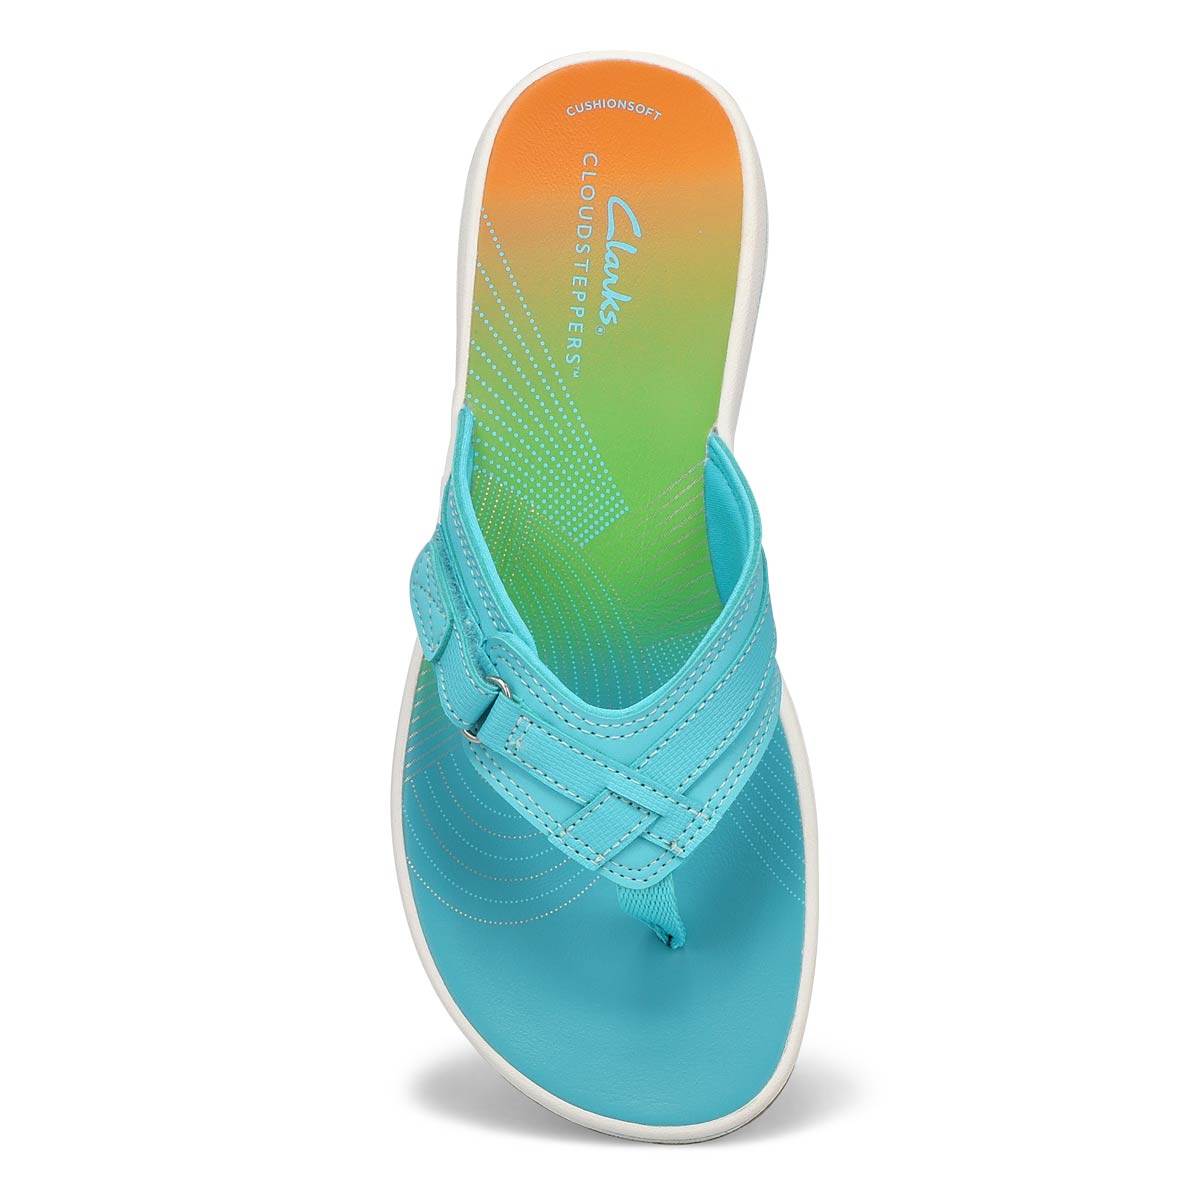 Women's  Breeze Sea Thong Sandal -Turquoise Ombre